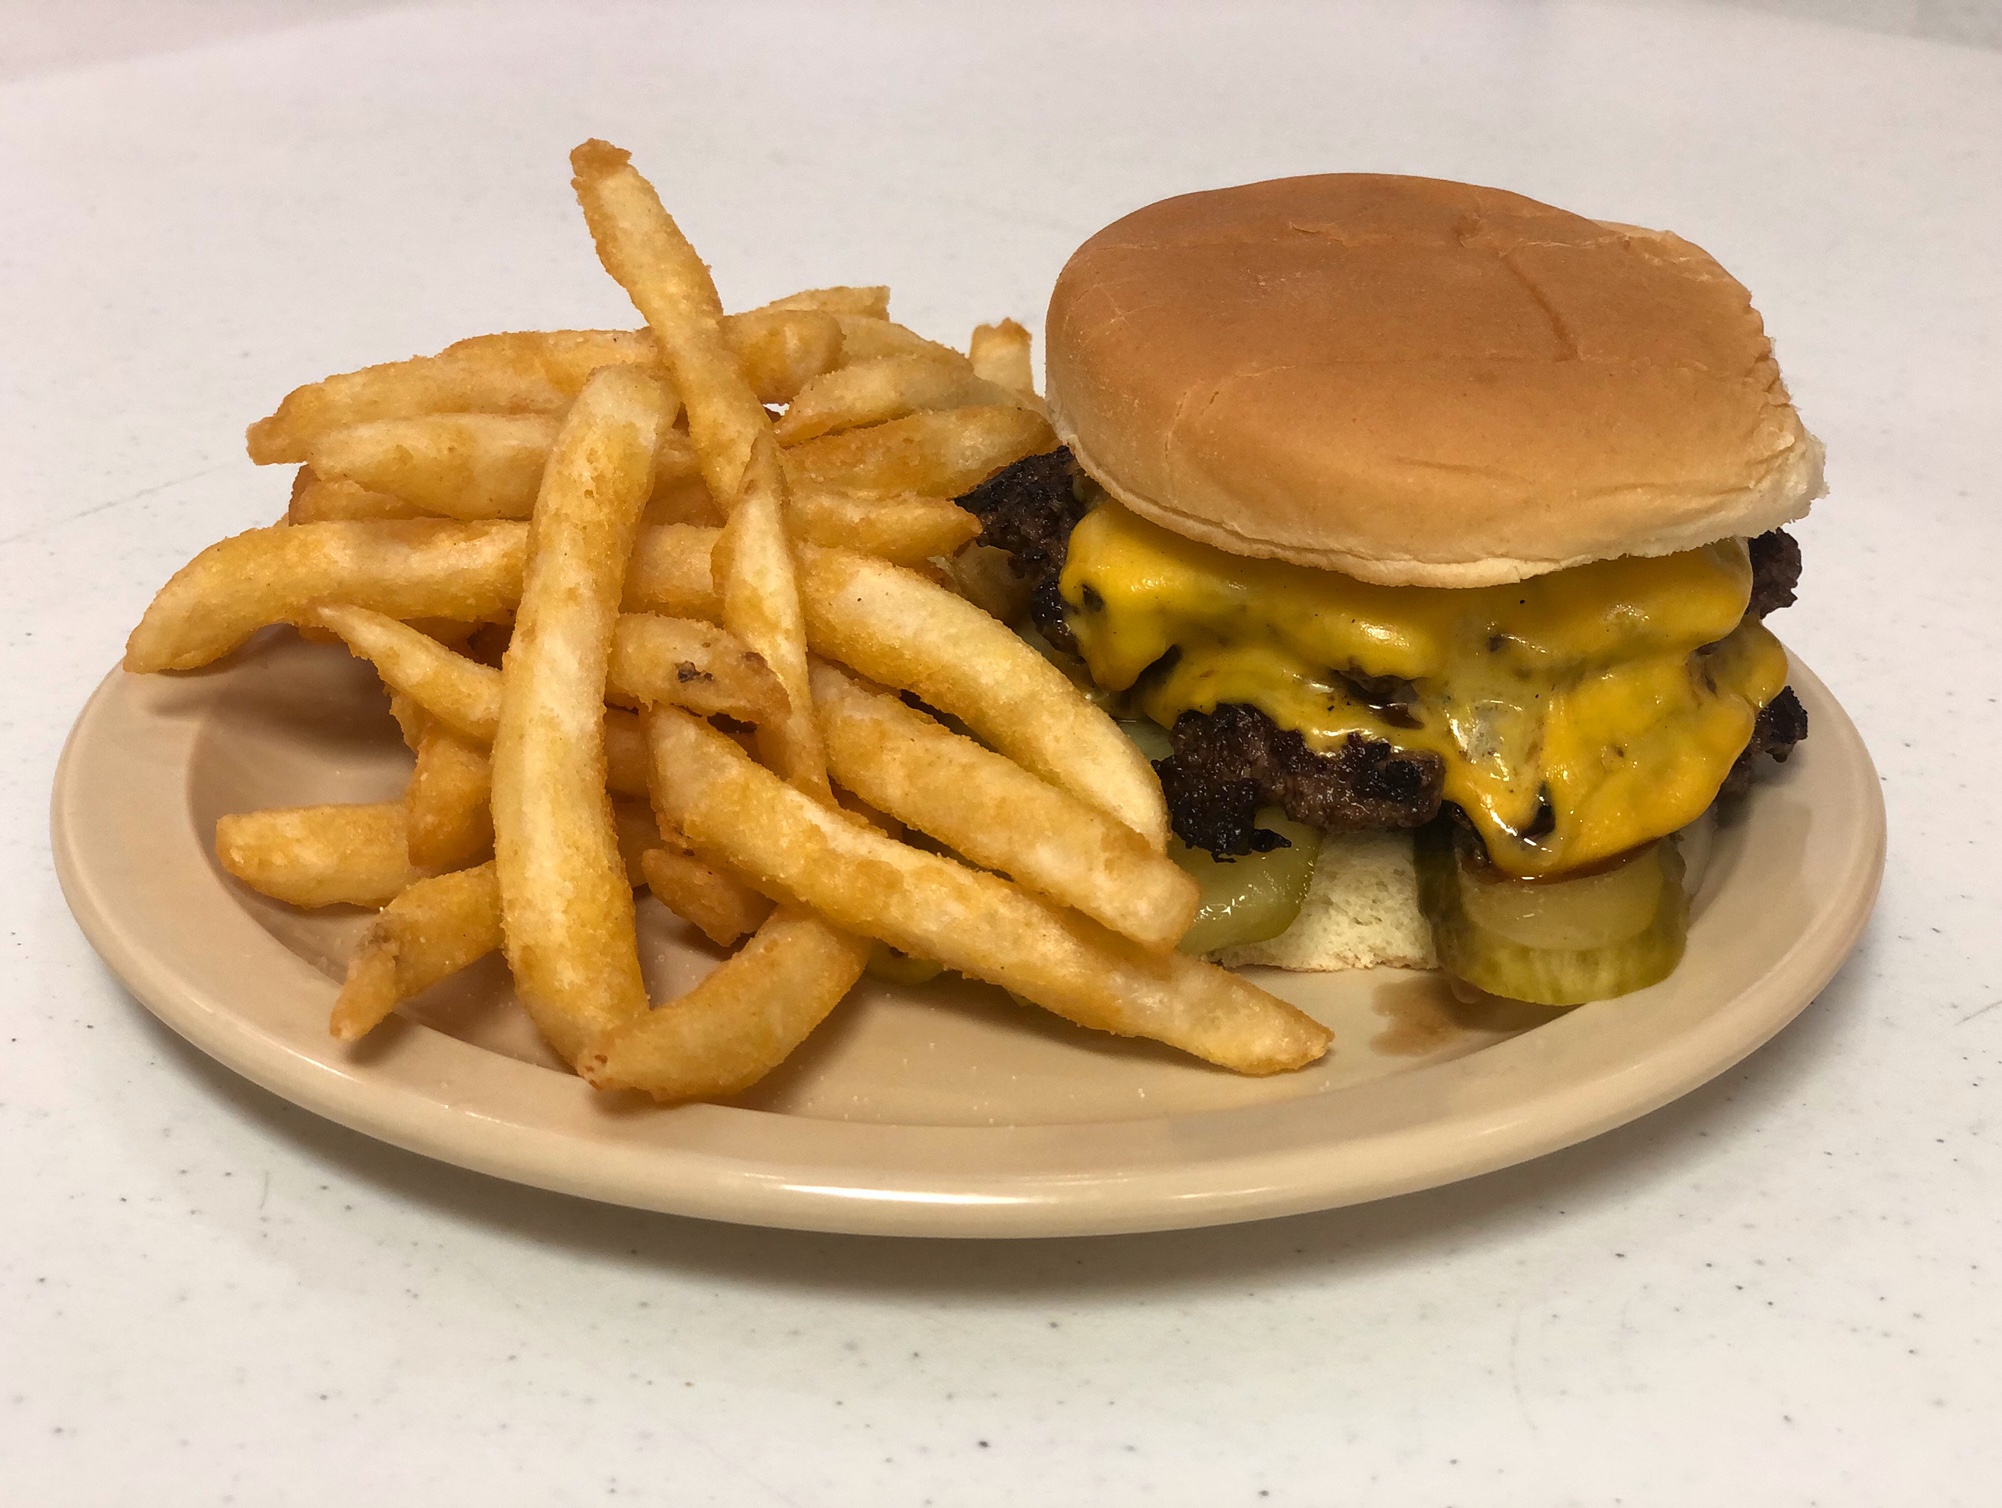 On a brown table, there is a beige plate with fries beside a cheeseburger with melty American cheese and a long pickle sticking out from under the patties. Photo by Alyssa Buckley.